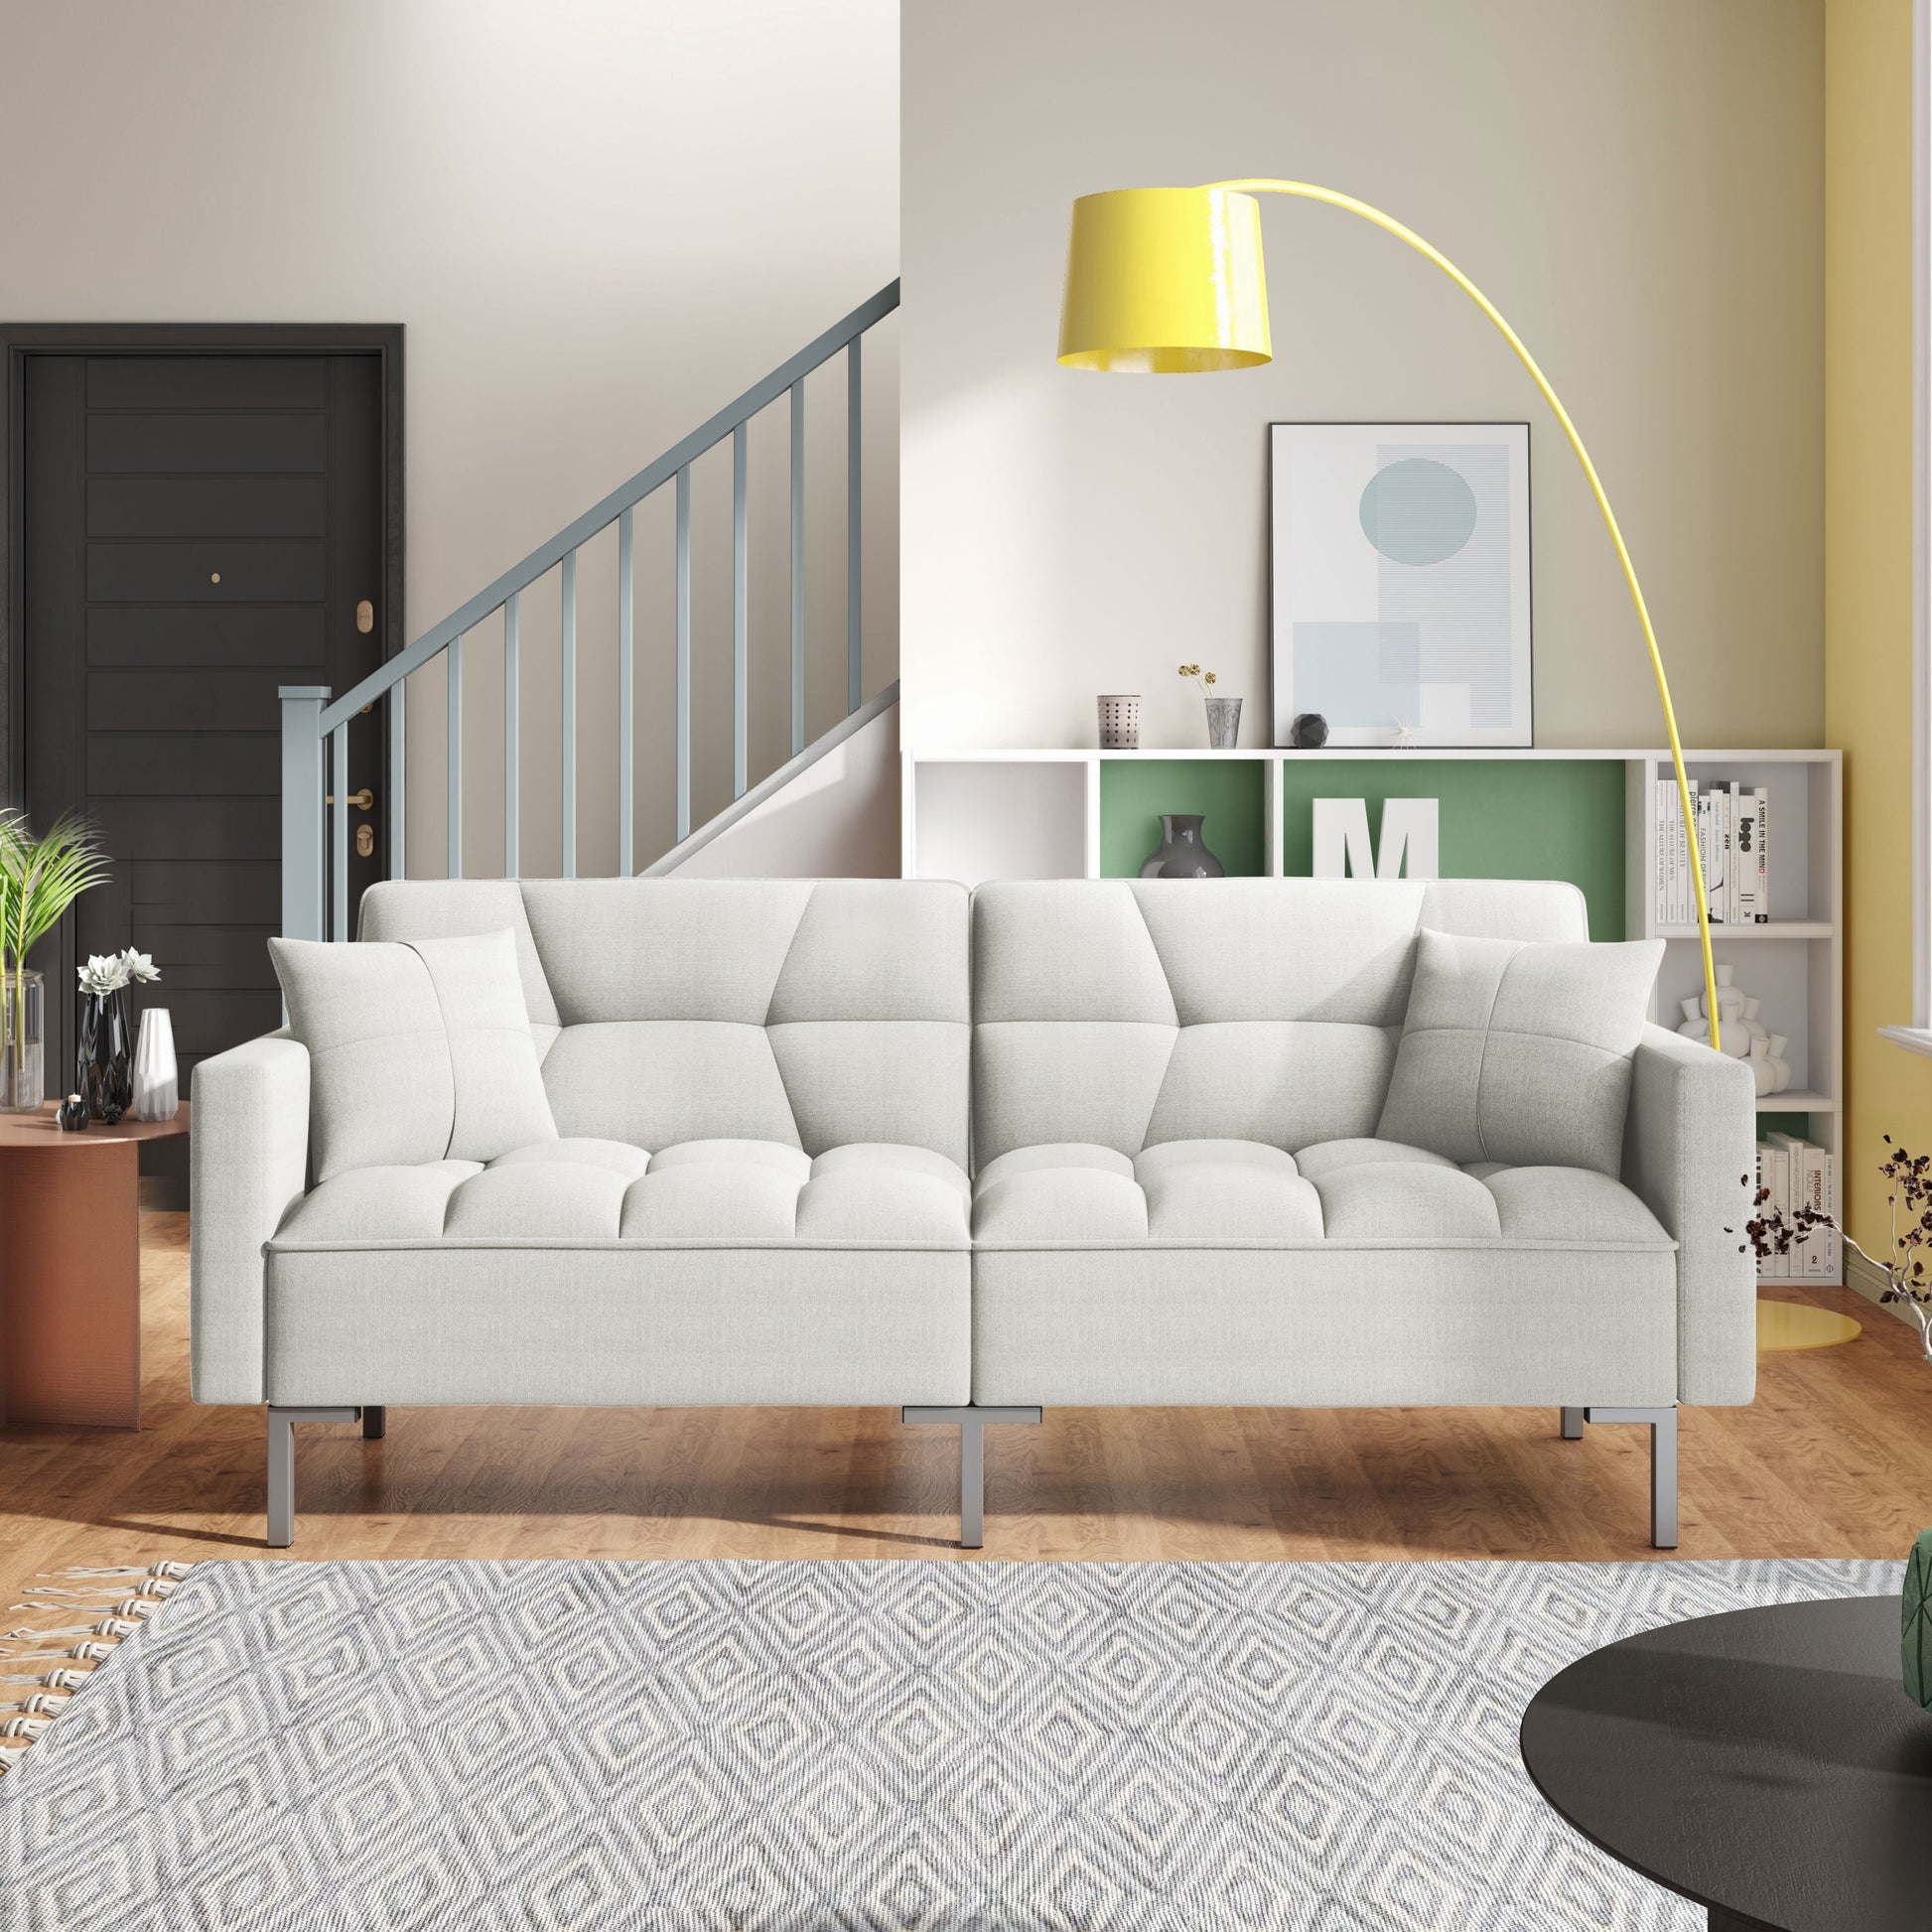 Daybed Folding Futon Sofa In White Color